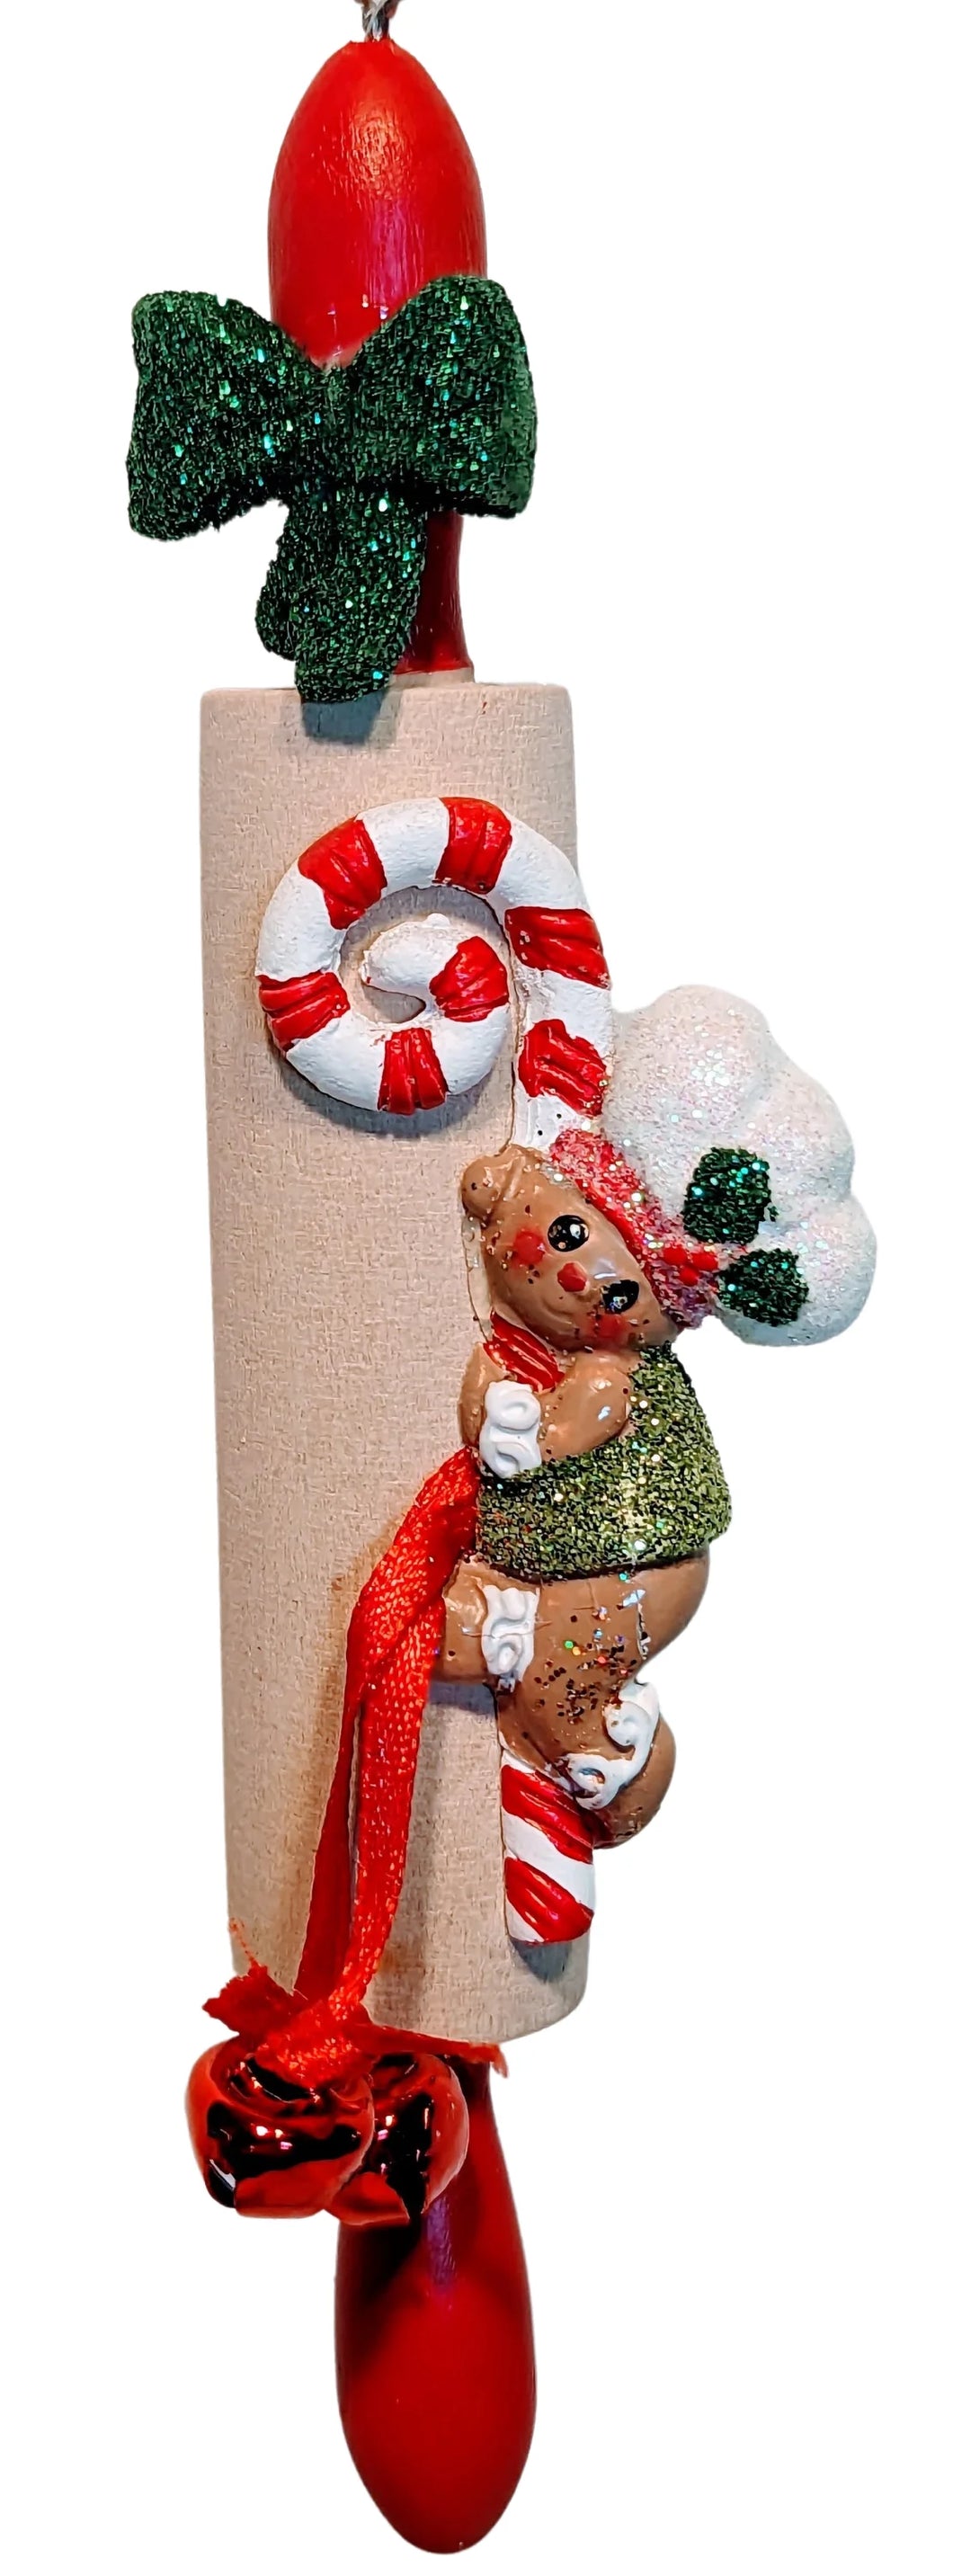 Gingerbread Boy on a Rolling Pin Ornament